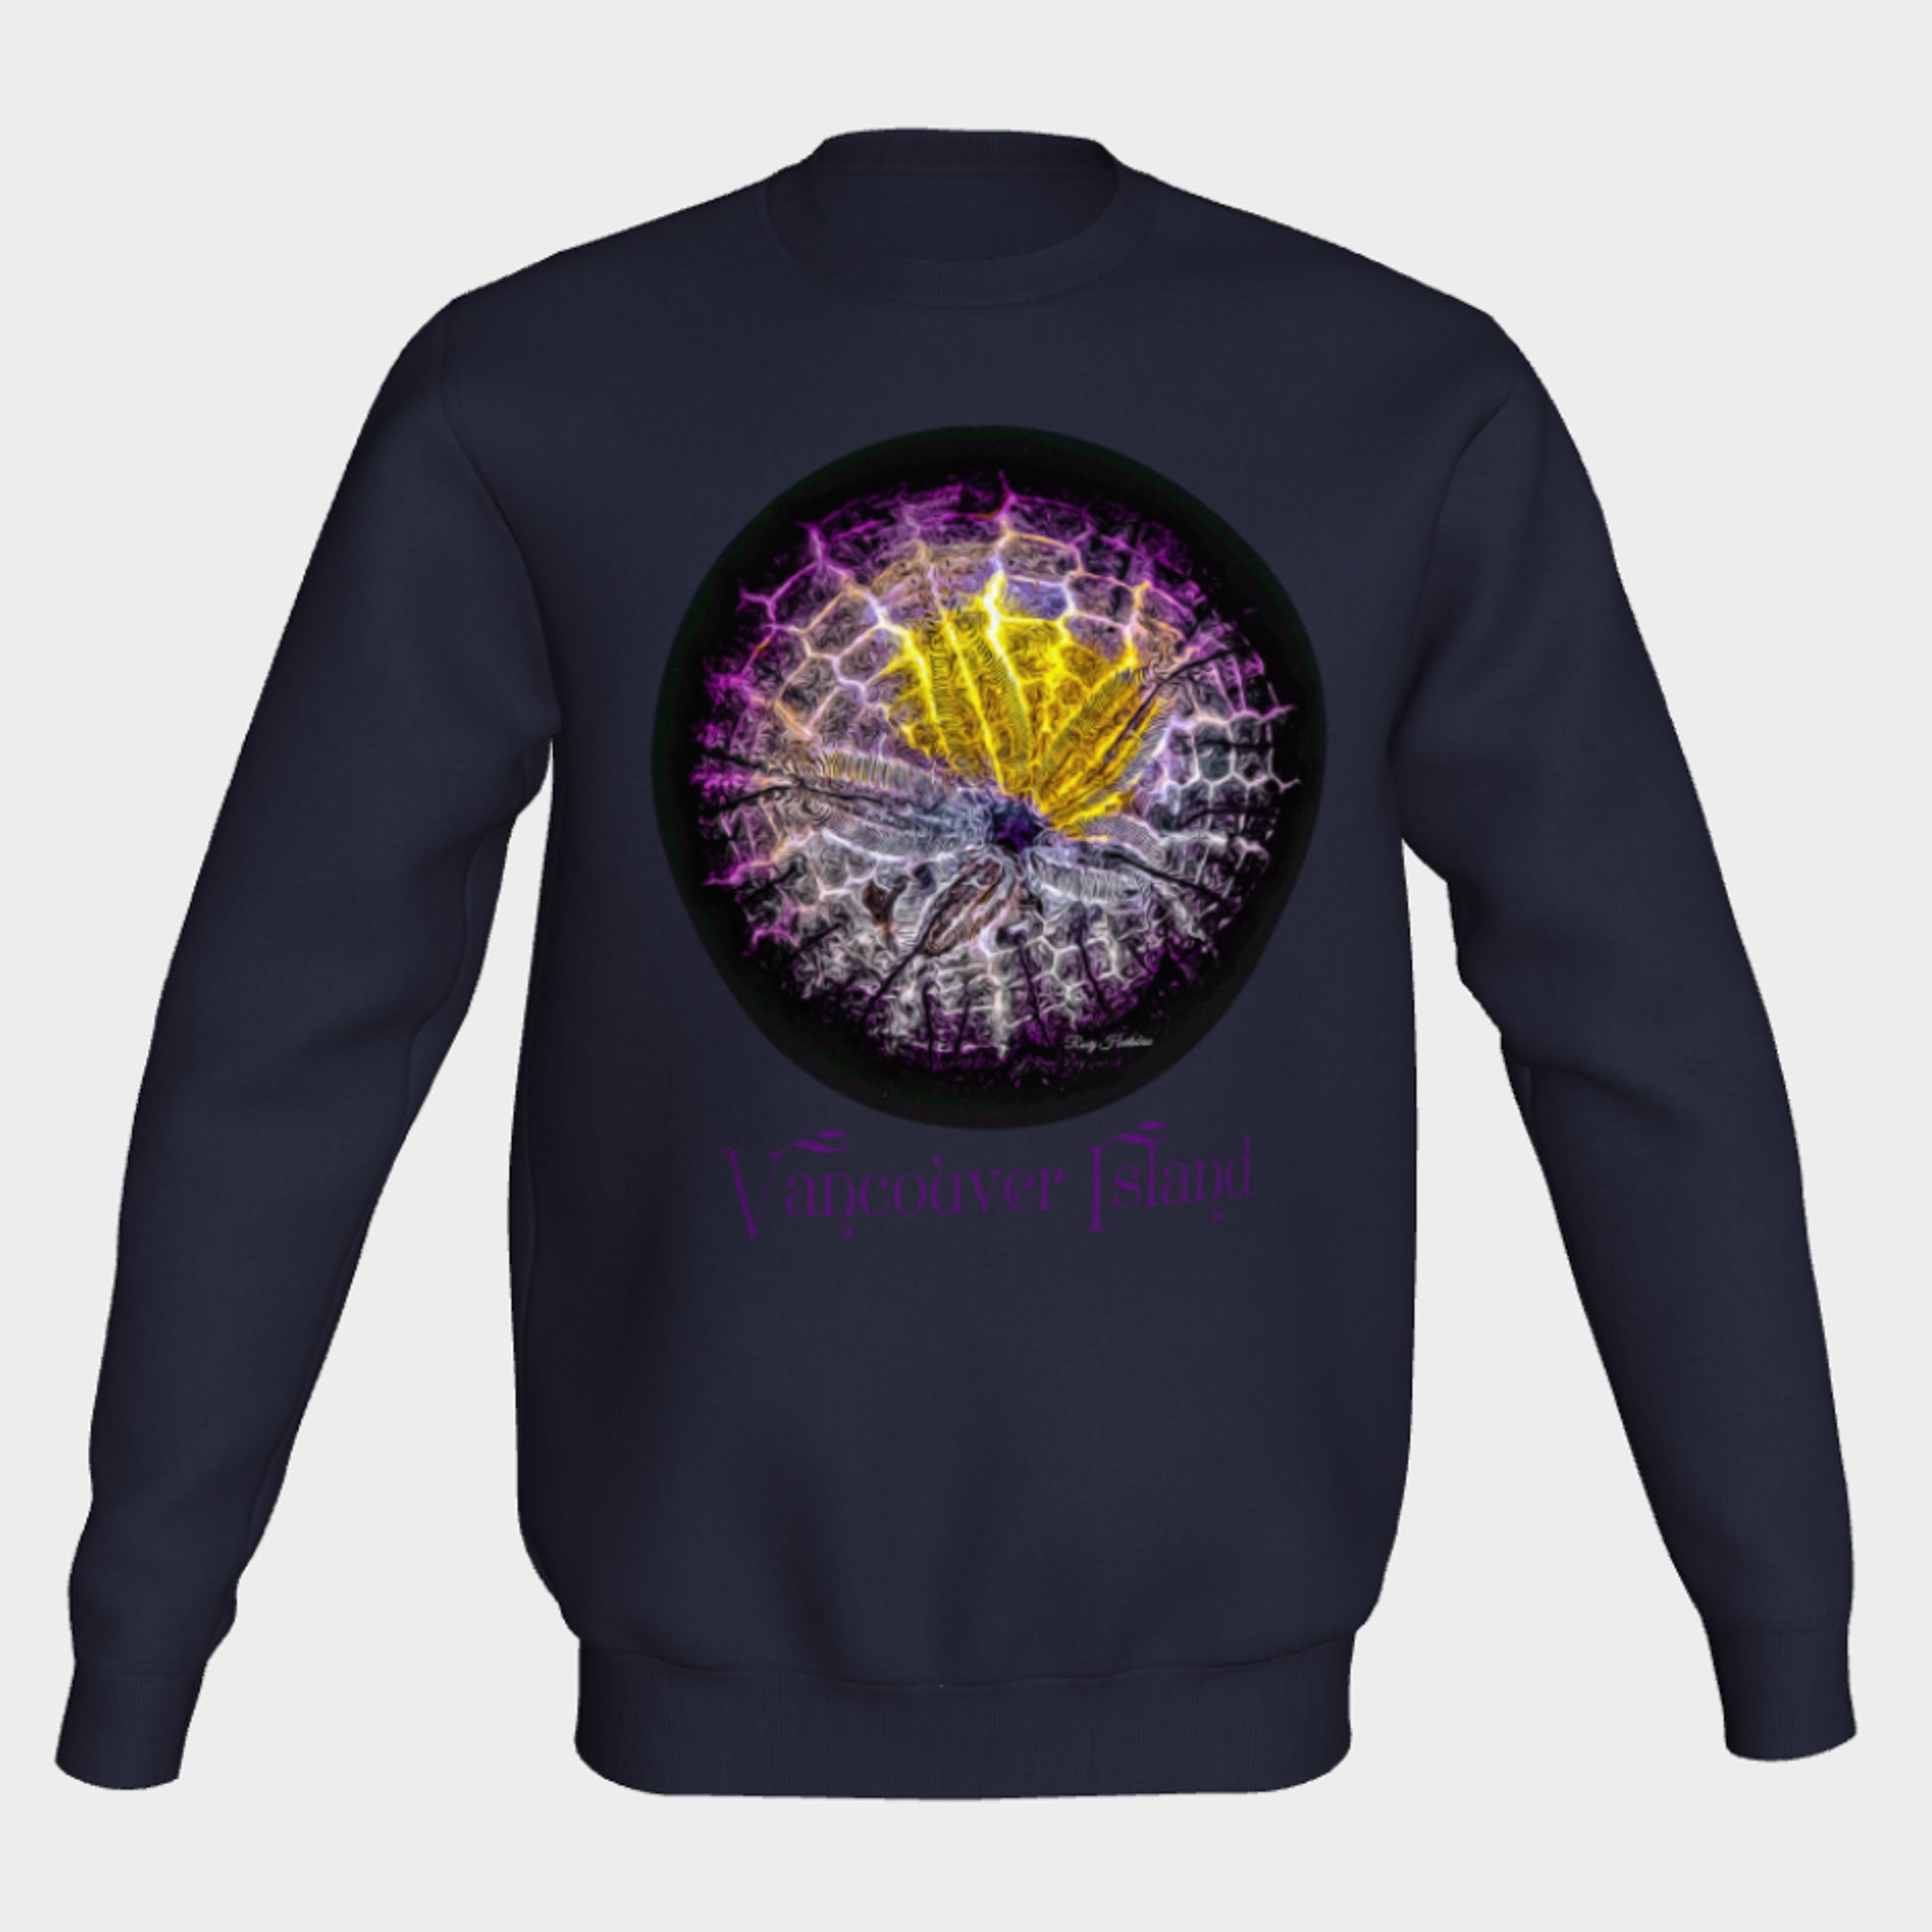 Spotlight Sand Dollar Vancouver Island Crewneck Sweatshirt What’s better than a super cozy sweatshirt? A super cozy sweatshirt from Van Isle Goddess!  Super cozy unisex sweatshirt for those chilly days.  Excellent for men or women.   Fit is roomy and comfortable. 